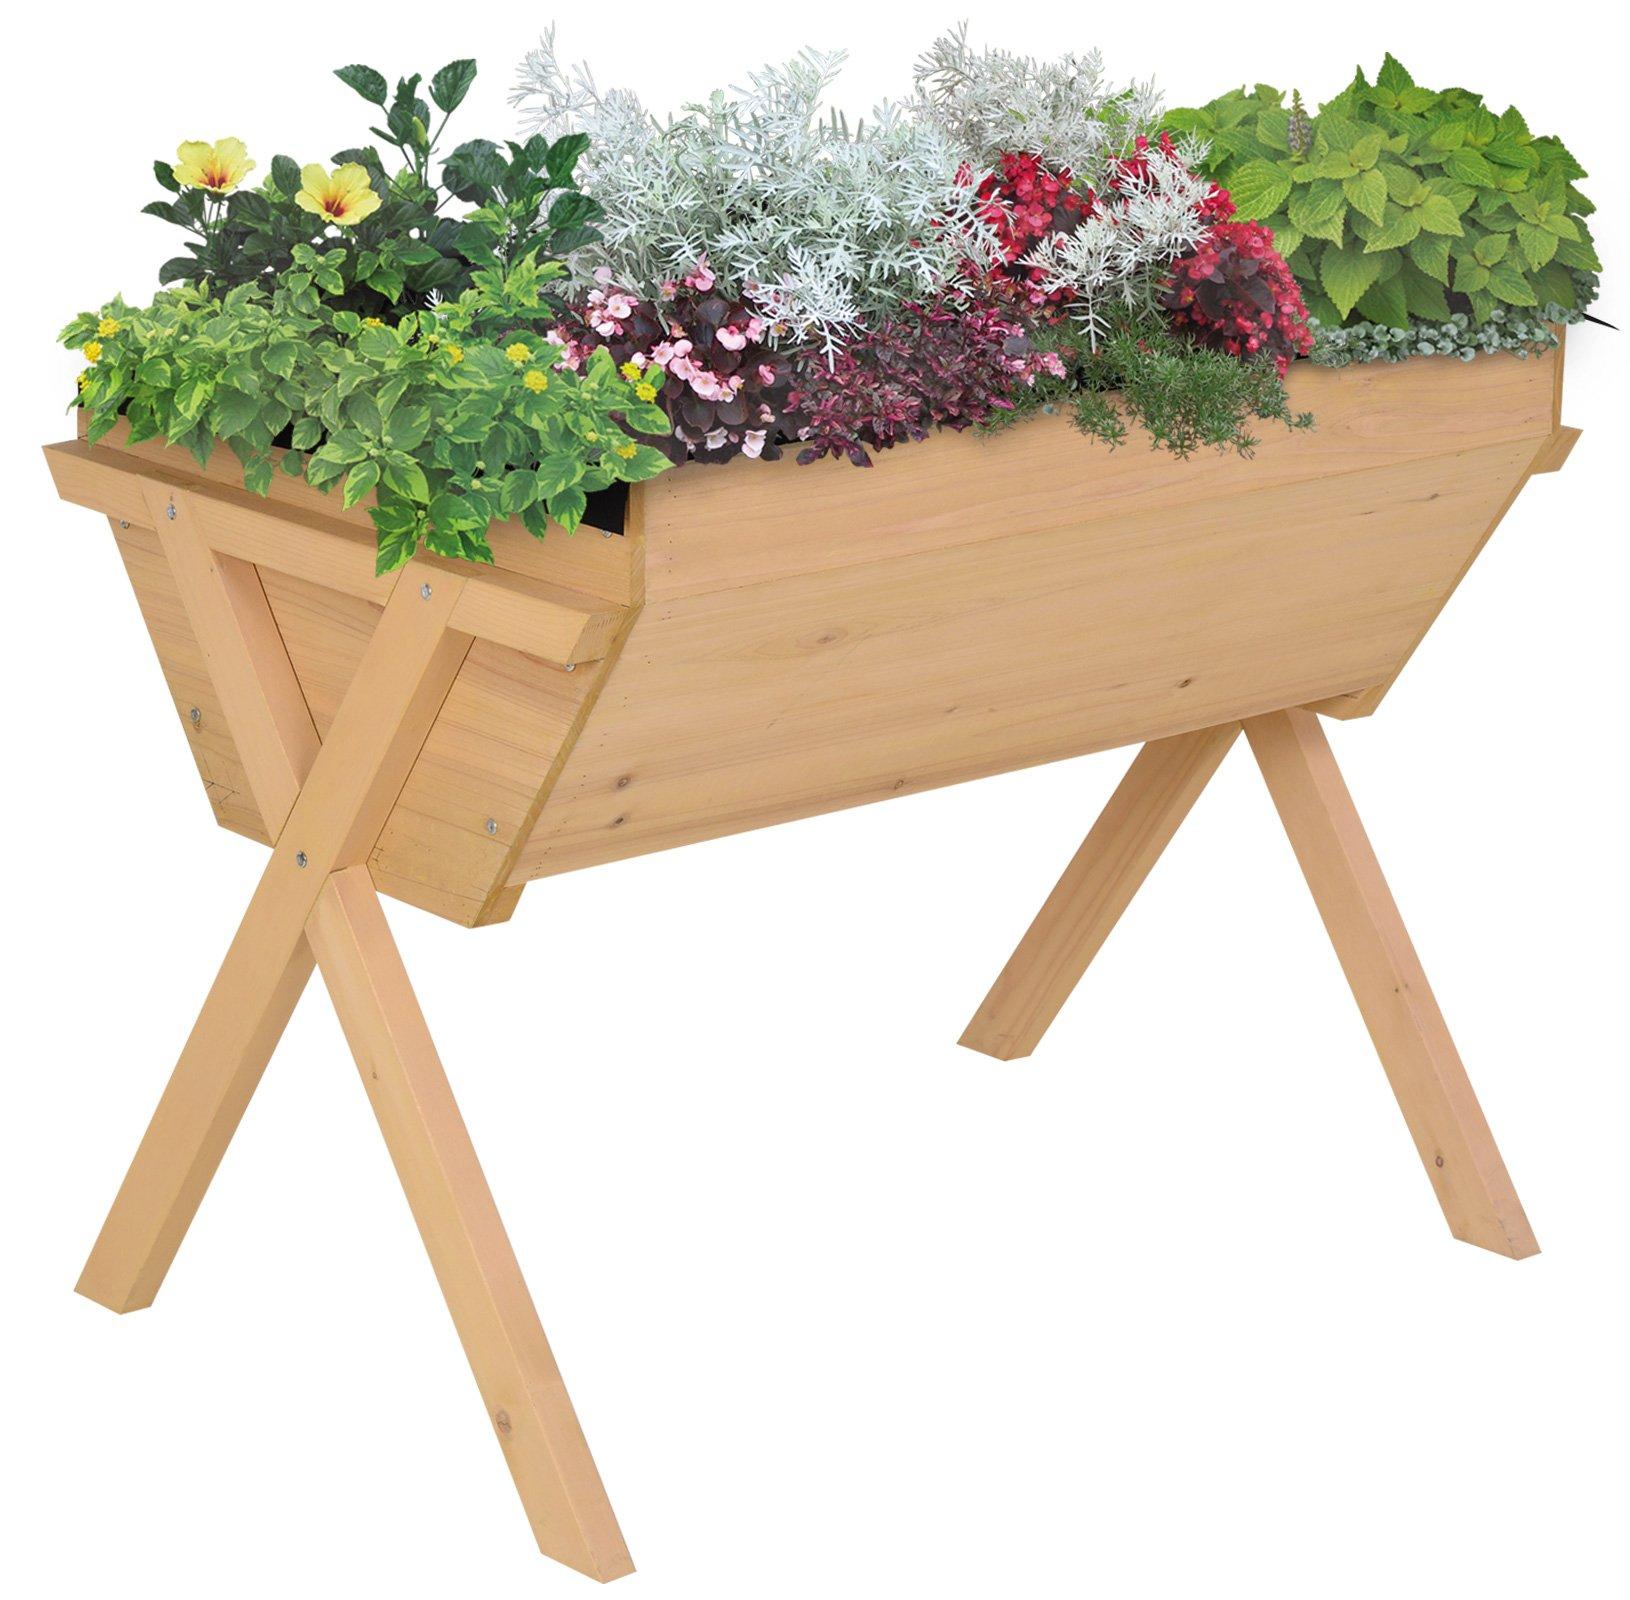 Wooden Planter Raised Bed Stand Vegetable Flower Bed 100 x 70 x 80cm